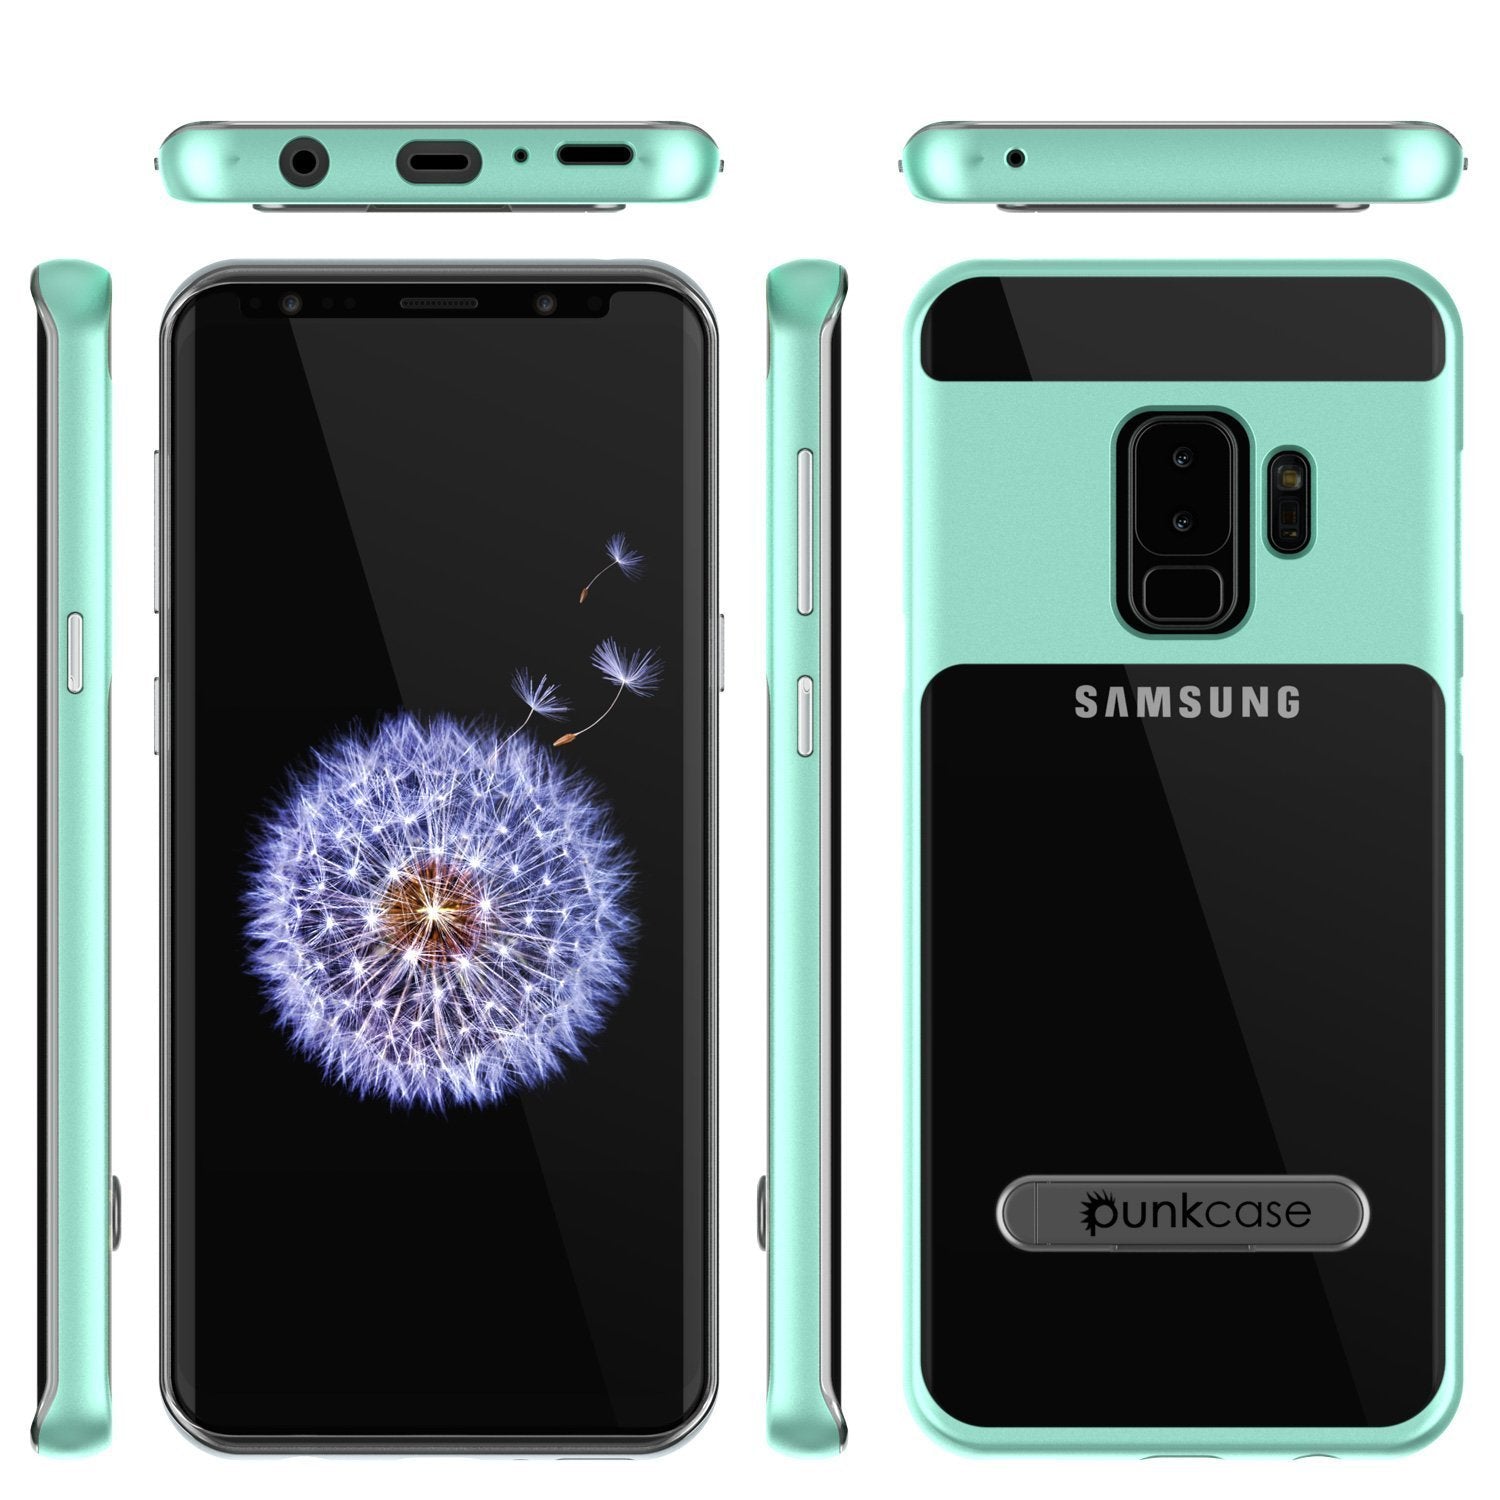 Galaxy S9+ Plus Case, PUNKcase [LUCID 3.0 Series] [Slim Fit] [Clear Back] Armor Cover w/ Integrated Kickstand, Anti-Shock System & PUNKSHIELD Screen Protector for Samsung Galaxy S9+ Plus [Teal] - PunkCase NZ